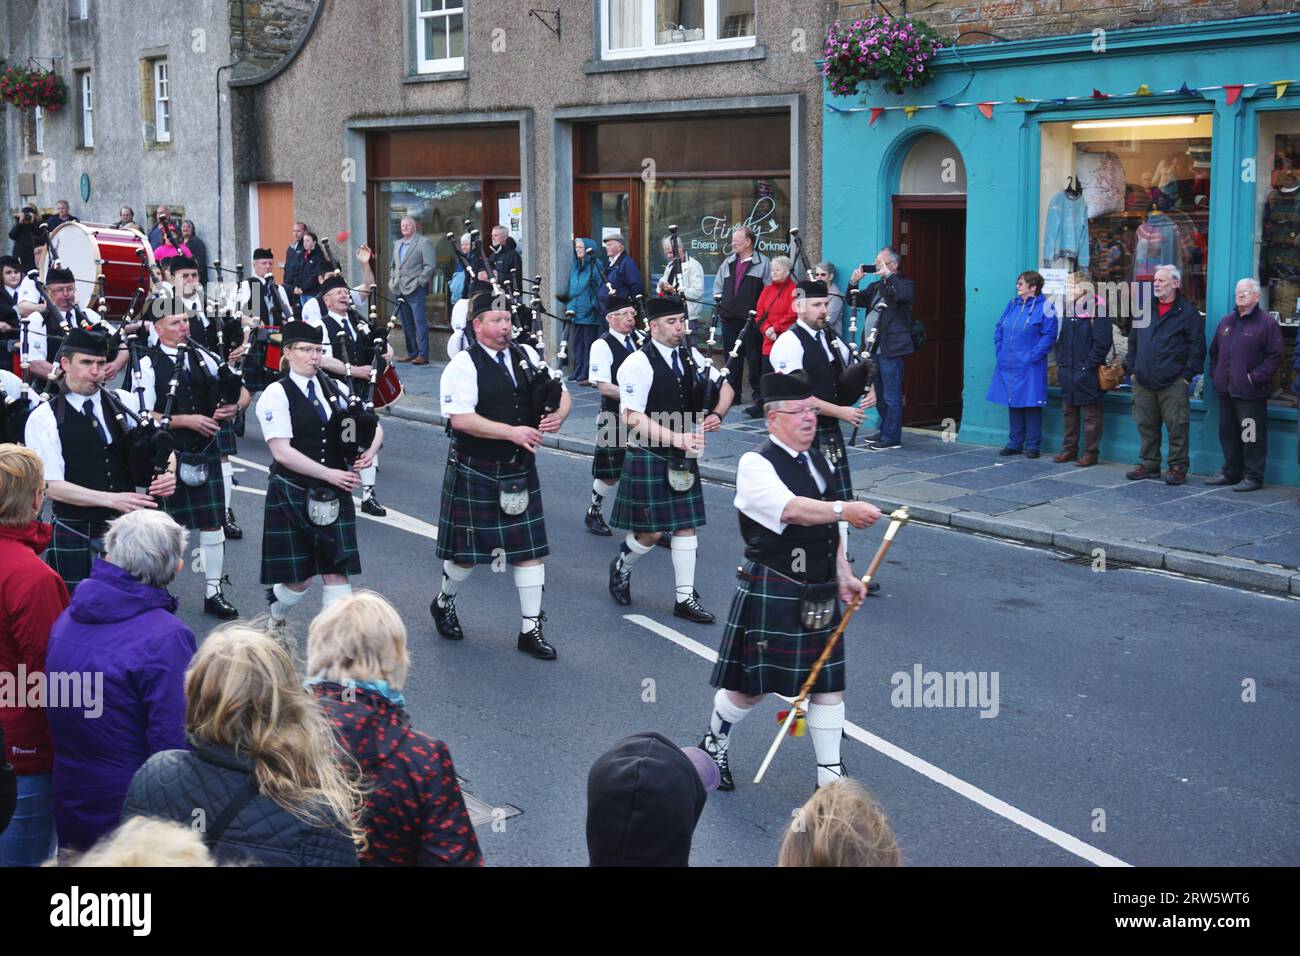 The drum major carries his gold-topped mace as he marches at the front of the Kirkwall City Pipe Band as they parade down the street on Orkney Island Stock Photo